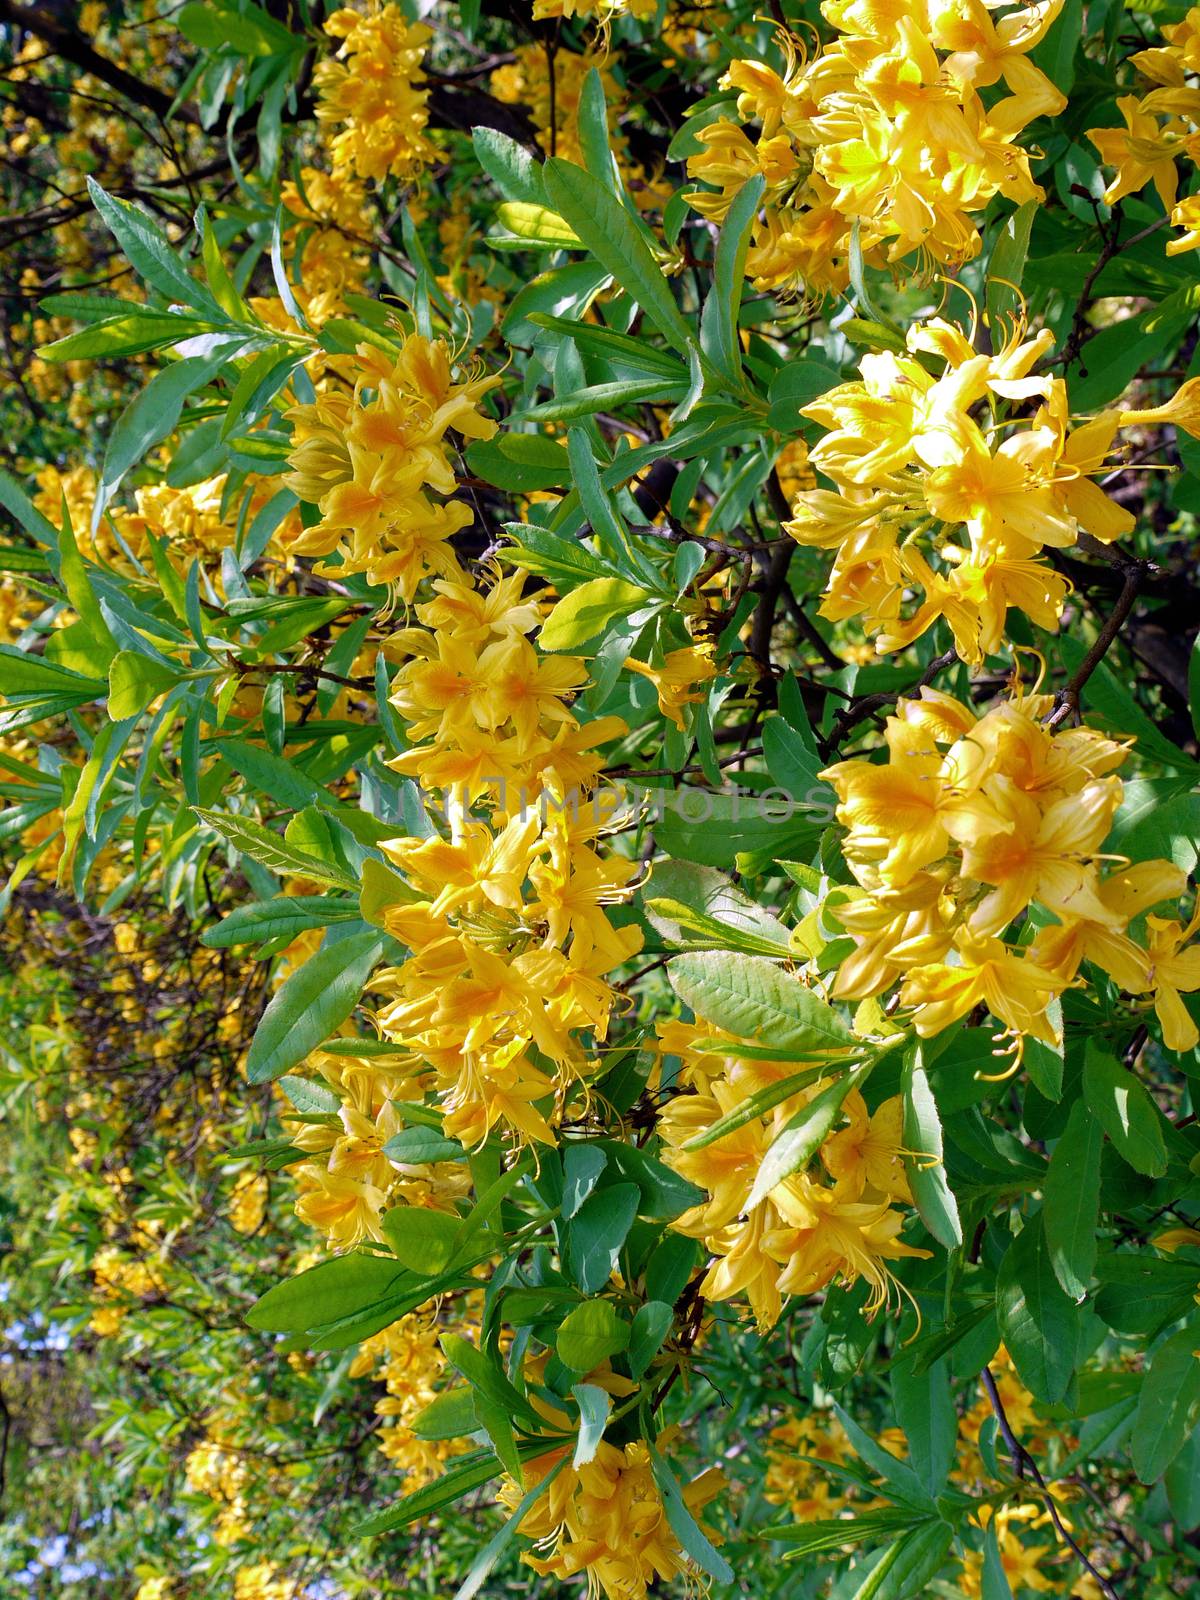 A tree with beautiful brightly yellow lush flowers and green leaves